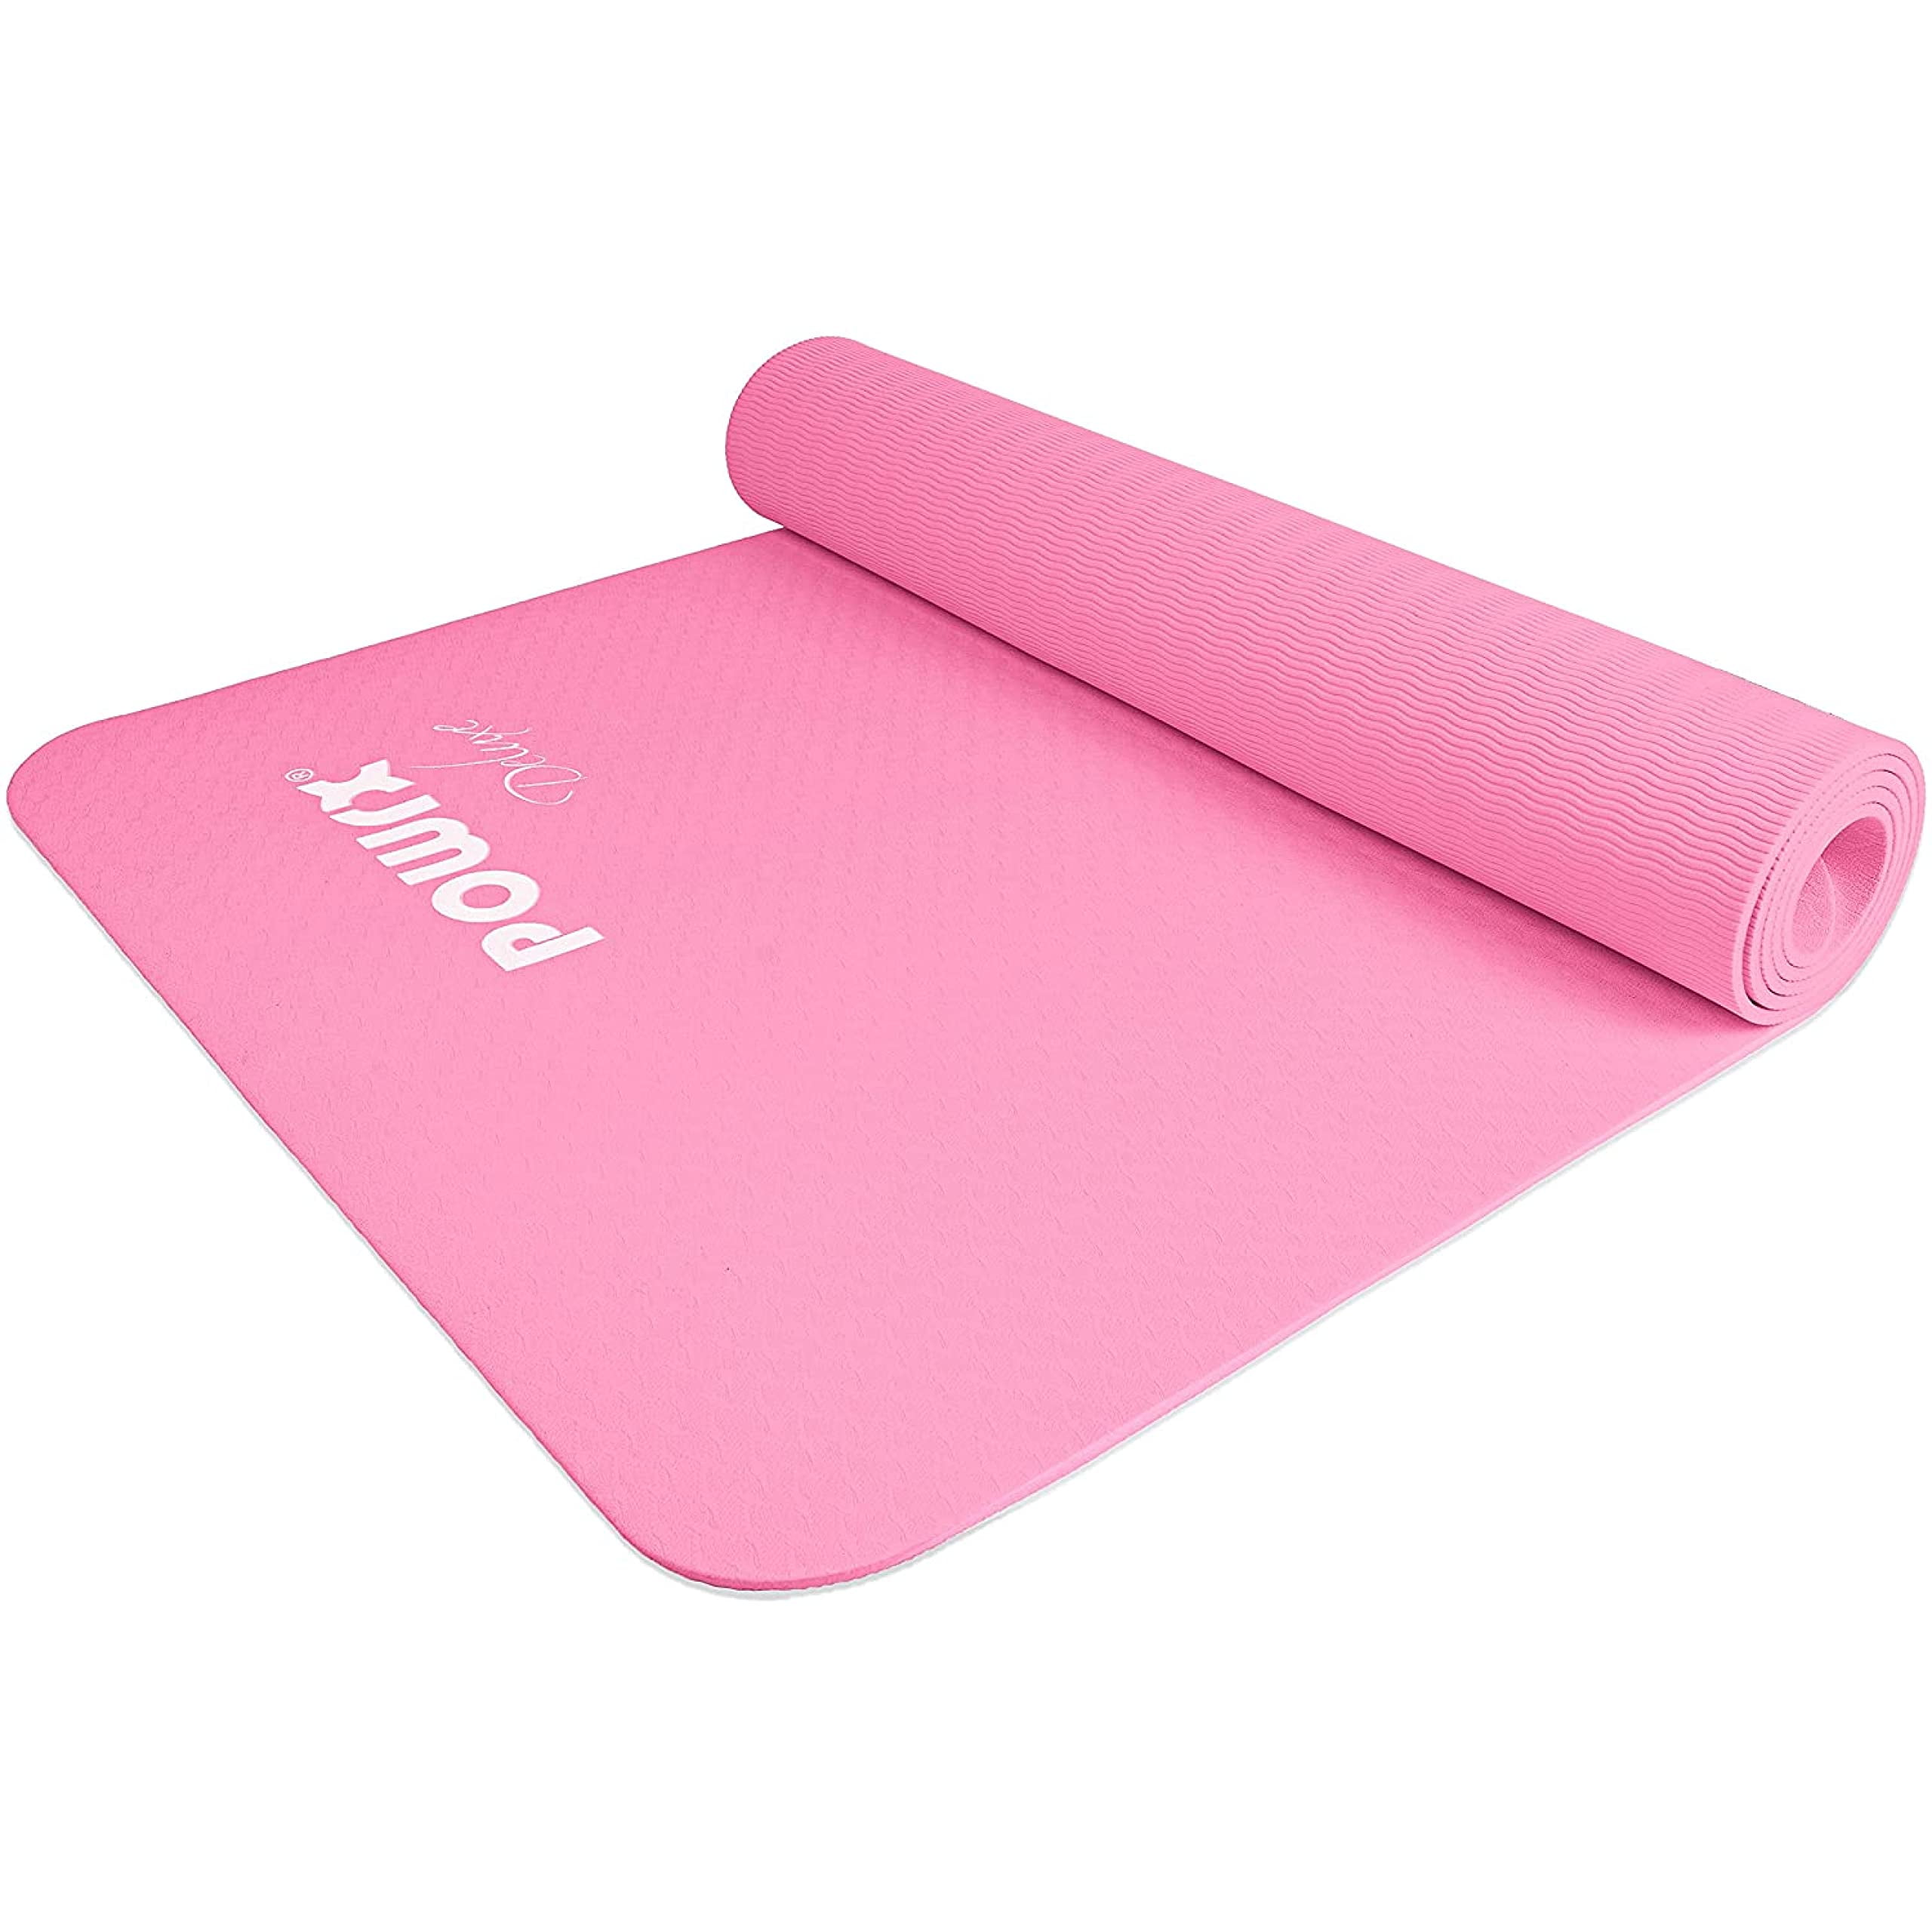 POWRX Yoga Mat TPE with Bag | Exercise mat for workout | Non-slip large  yoga mat for women, 68x24 Pink, 0.2 Inches Thickness